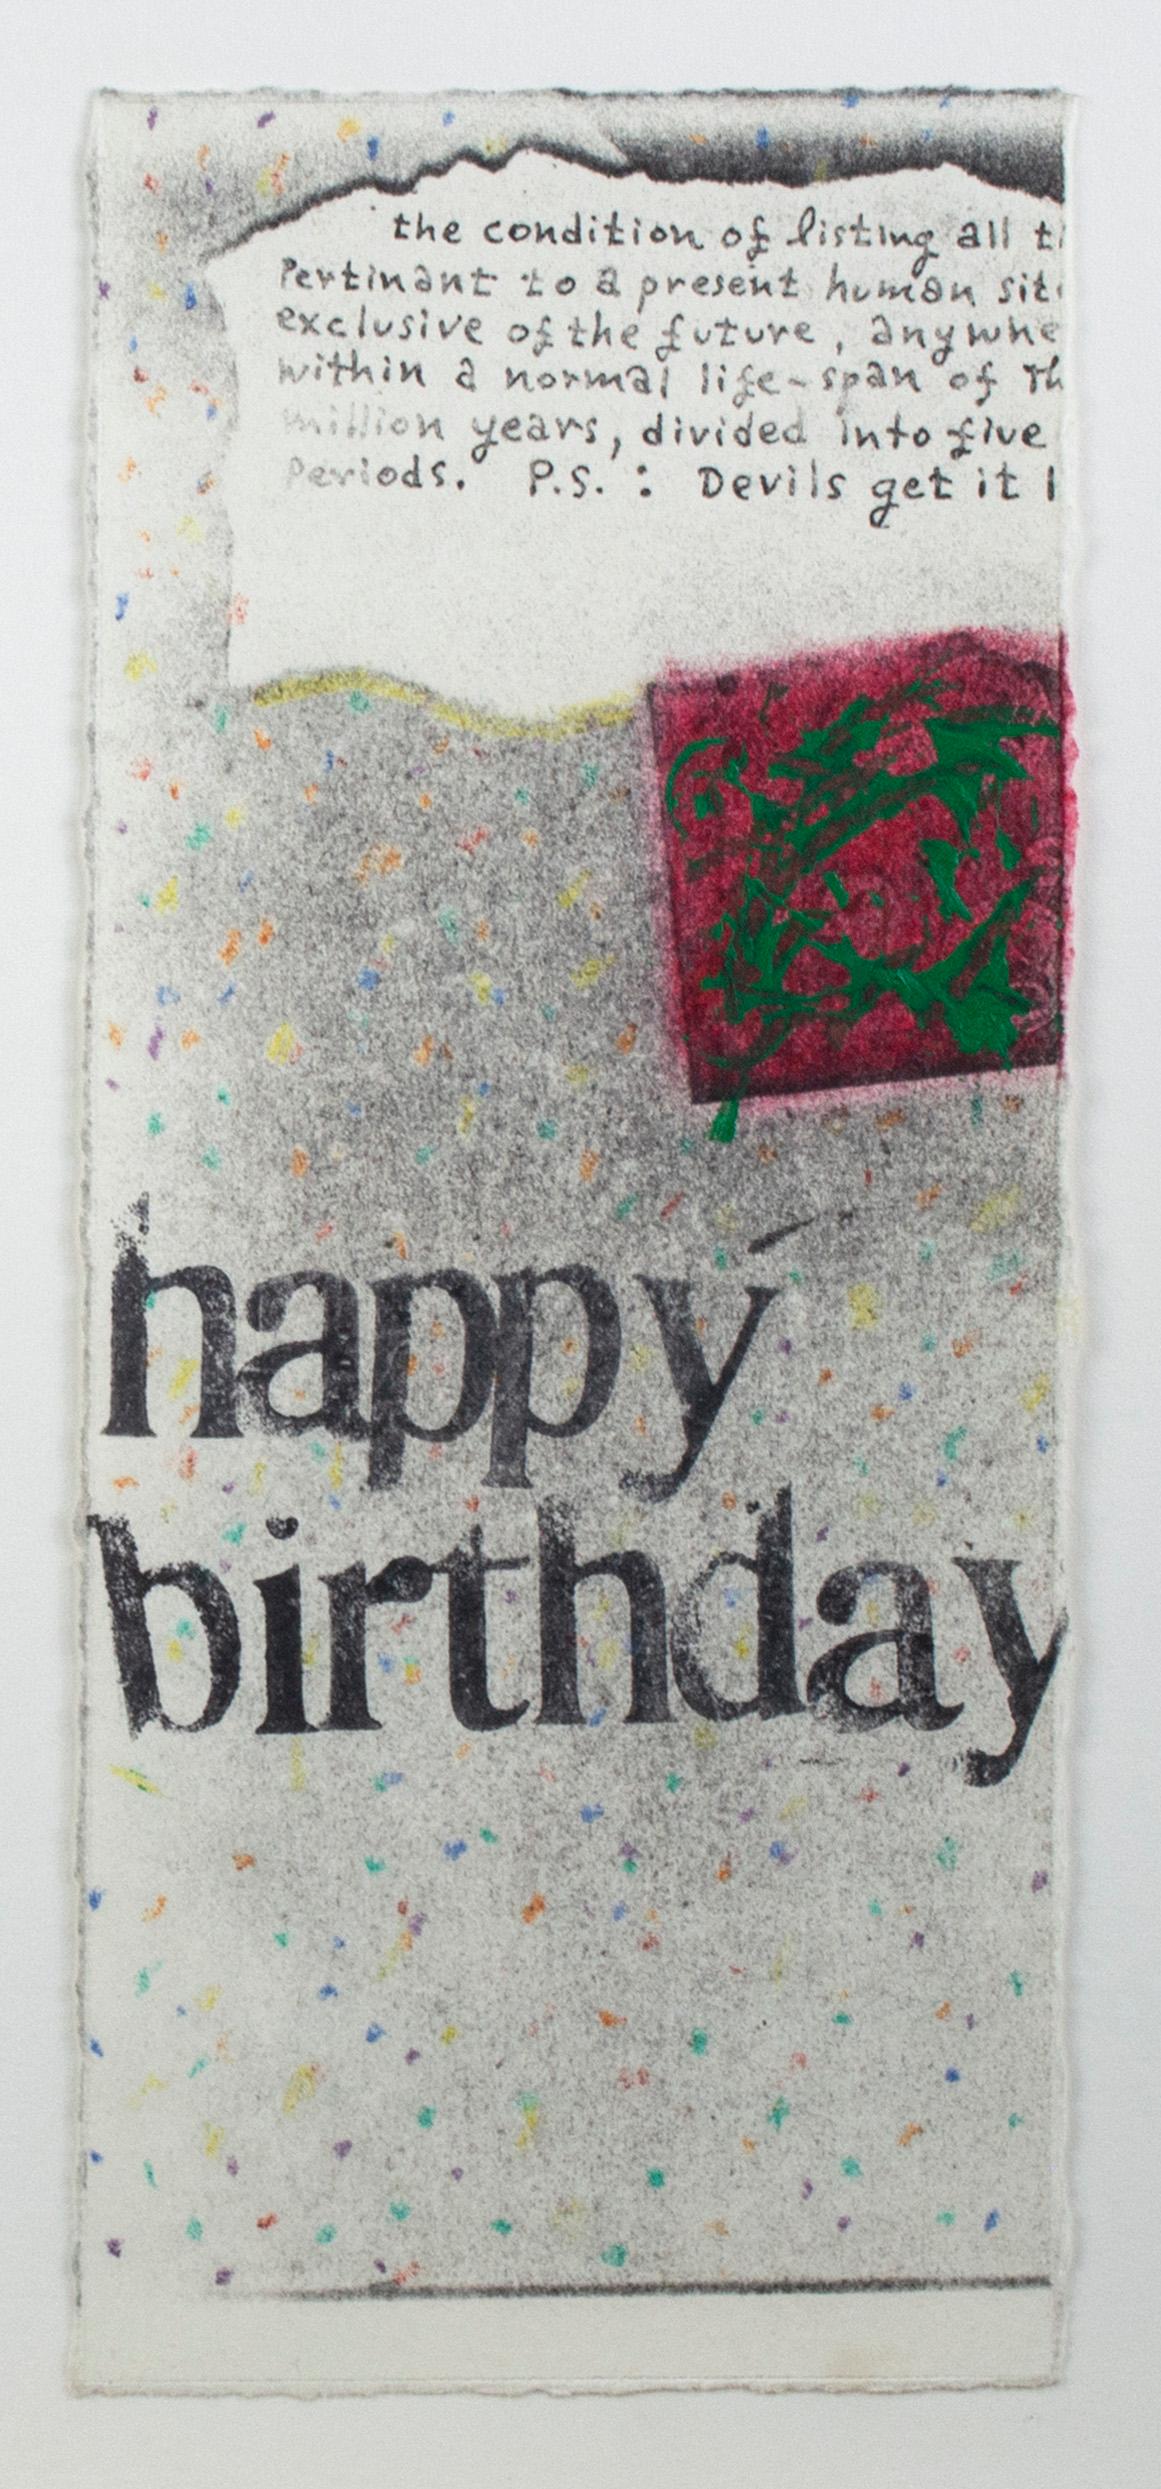 This set of four birthday collage cards are rare early examples of the small-scale collages that American artist Joel Jaecks began producing in the 1980s. Jaecks began working in watercolors when he was studying at UW-Milwaukee, but at the same time